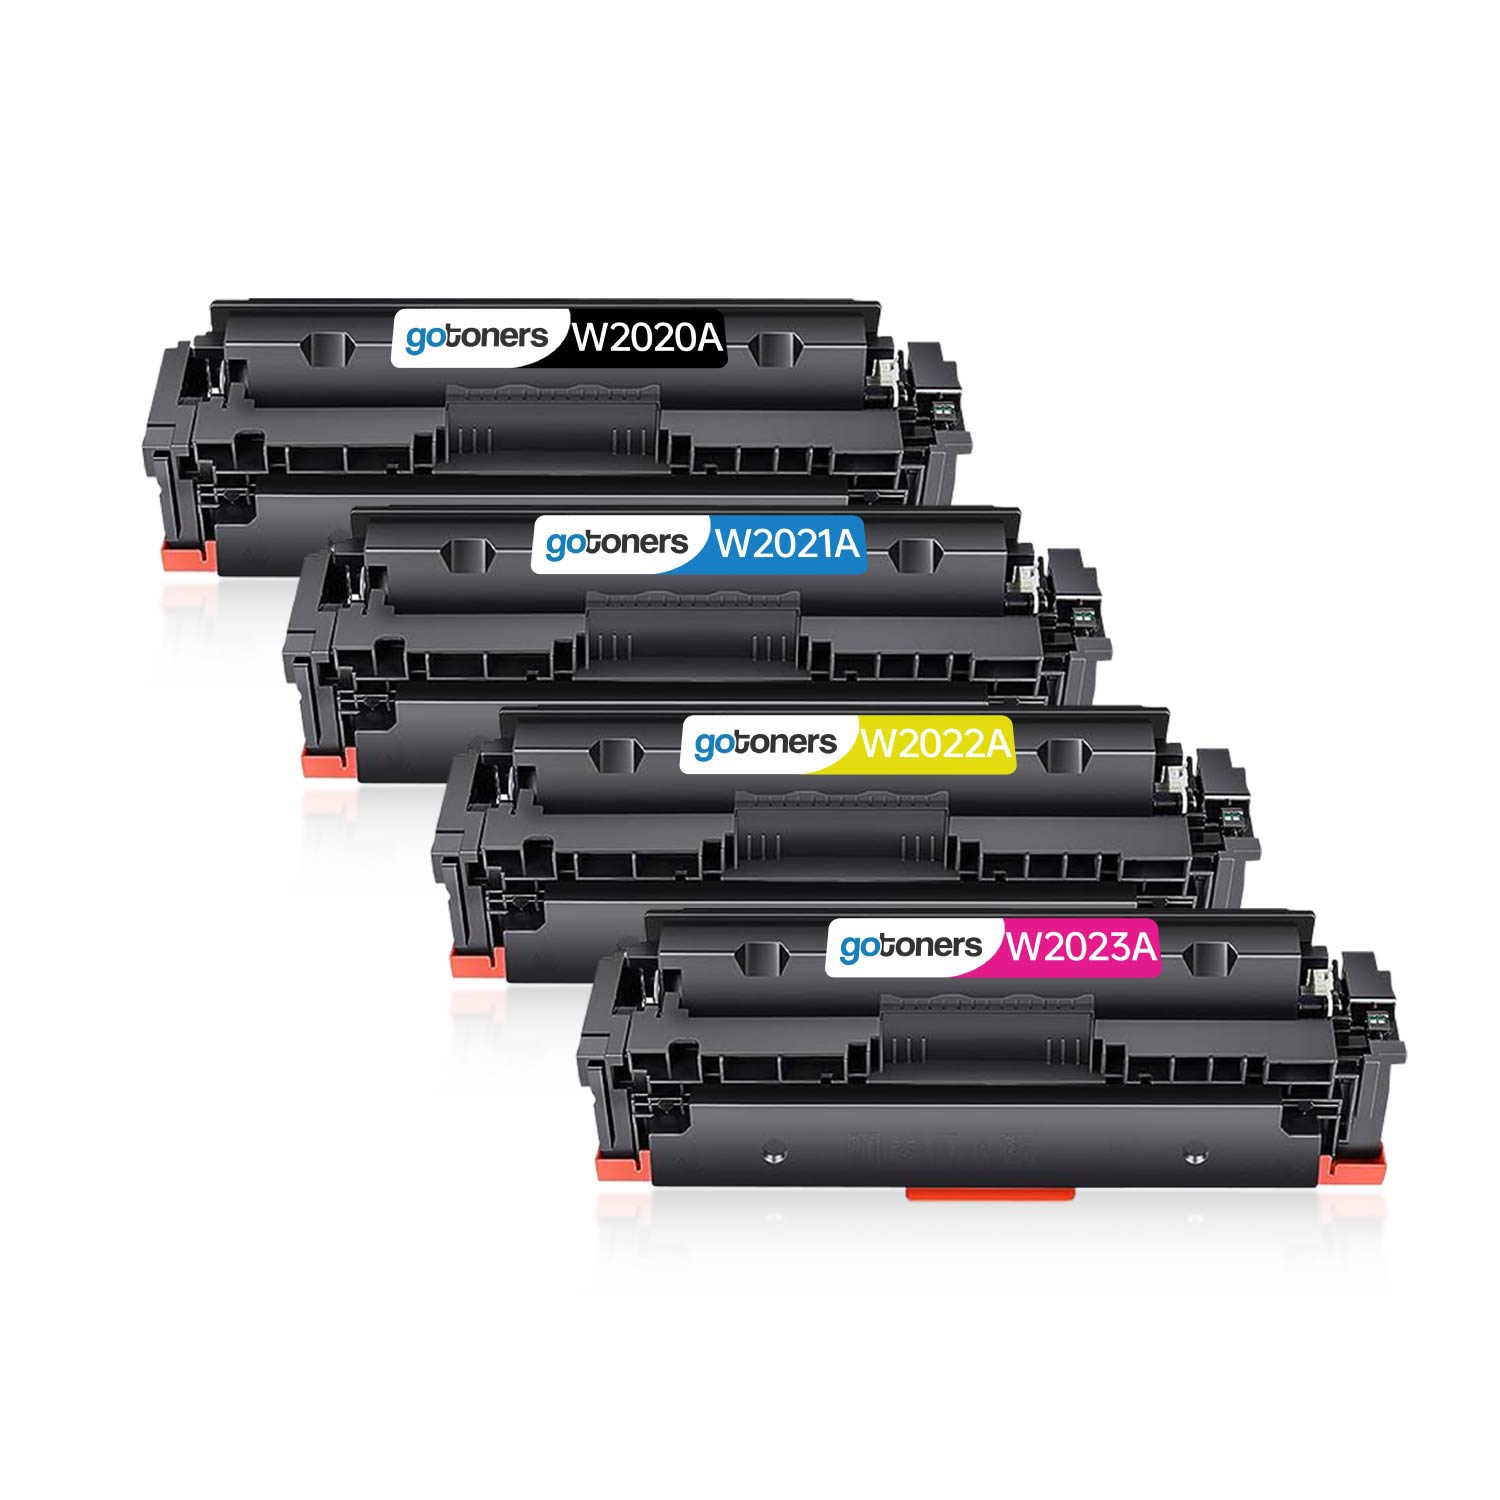 [with Chip] 414A Gotoners 4 Pack Compatible with HP W2020A 414X 414 Toner Cartridge for HP Color Laserjet Pro MFP M479fdw M479fdn M454dn M479 (Black, Cyan, Magenta, Yellow)